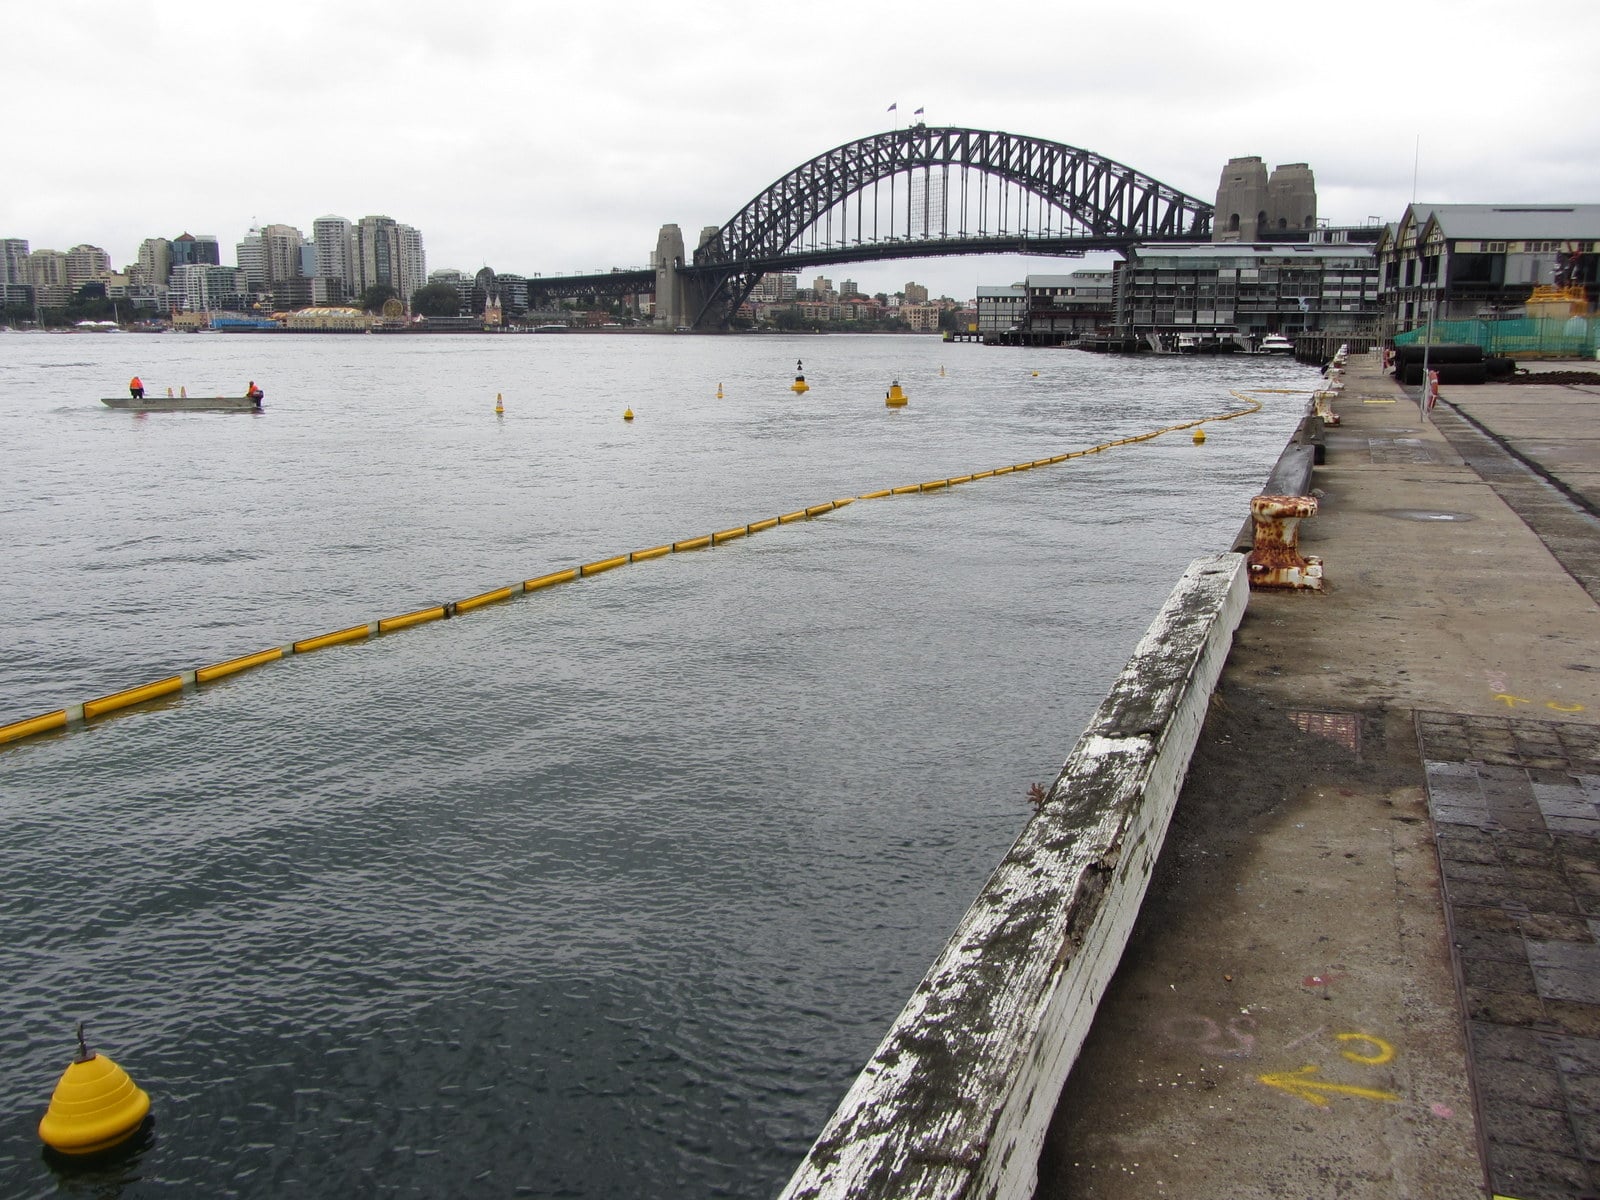 Silt Curtain deployed at Barangaroo in Sydney Harbour with Sydney Harbour Bridge in background